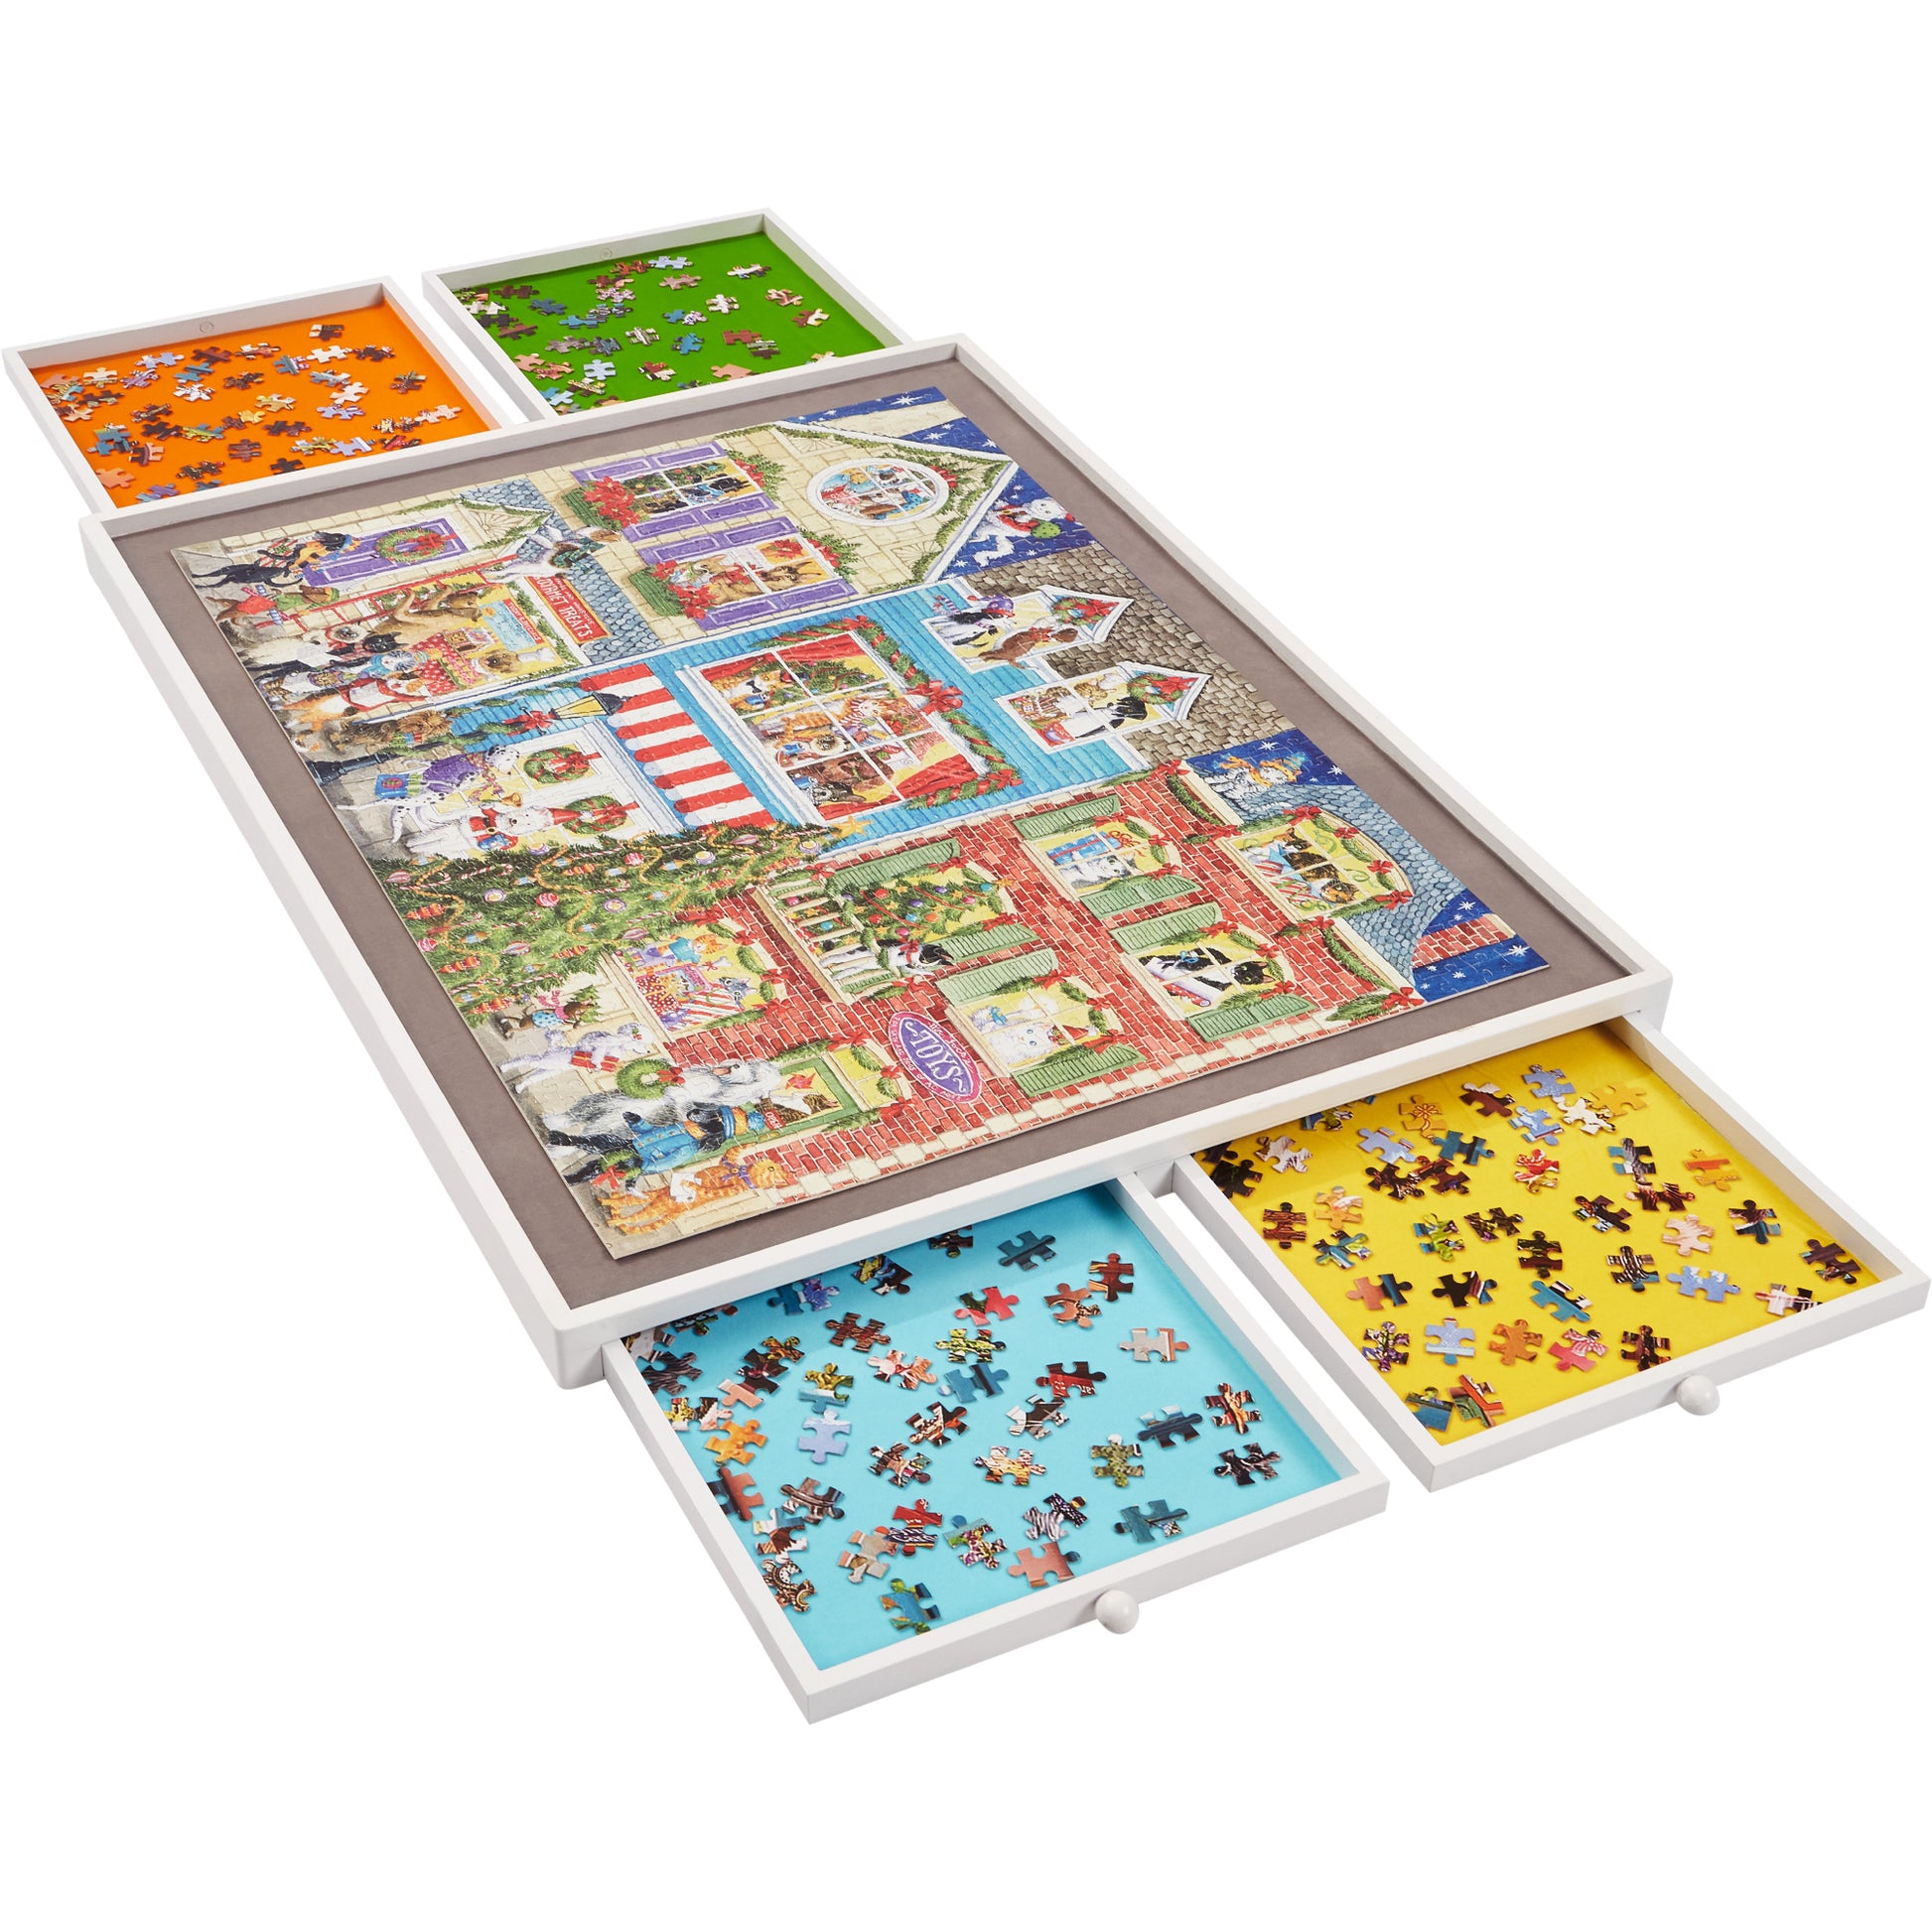 YiShan yishan wooden jigsaw puzzle board table for 1000 pieces